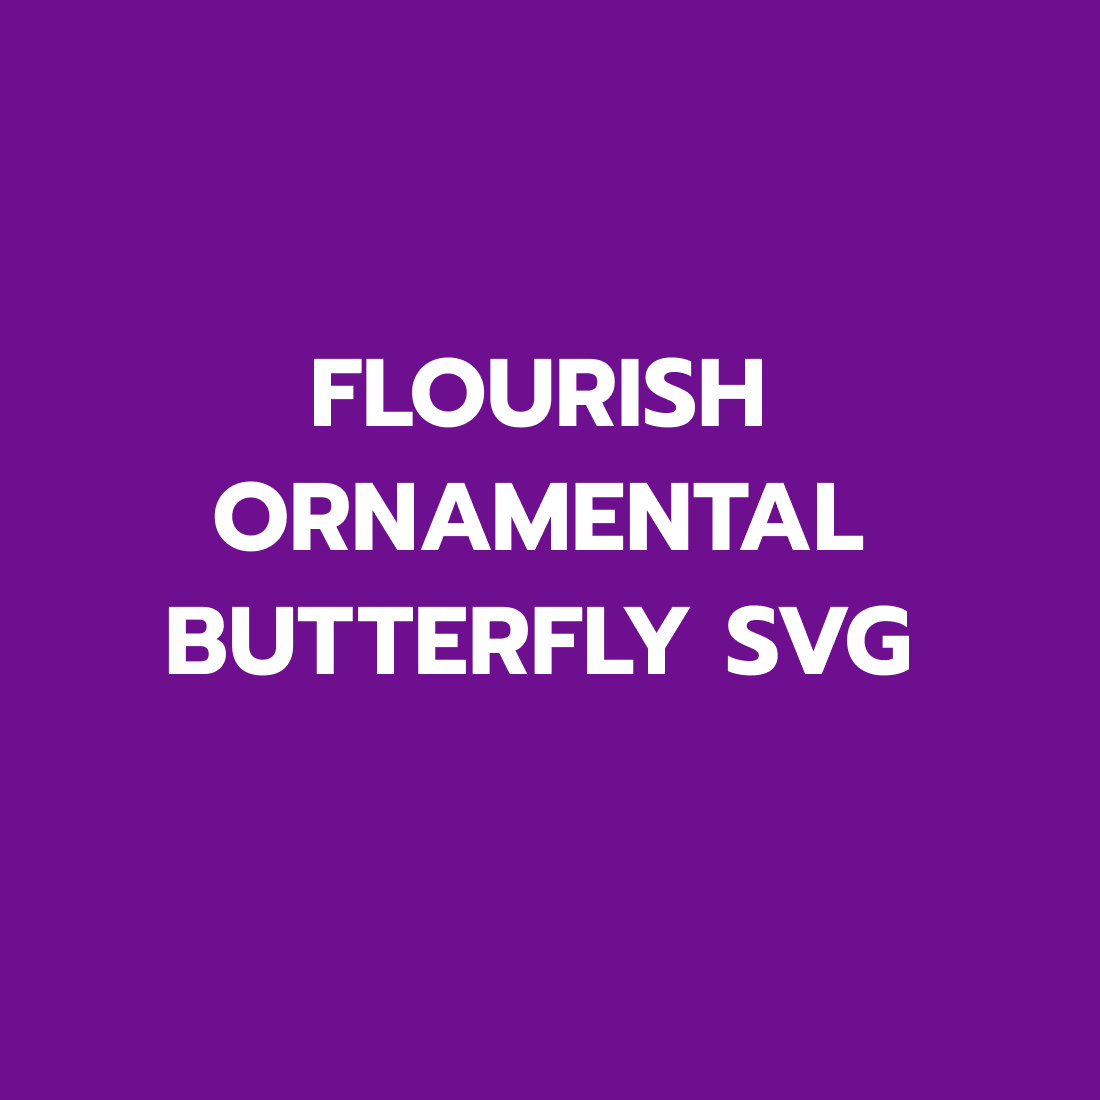 Flourish Ornamental Butterfly SVG preview image.